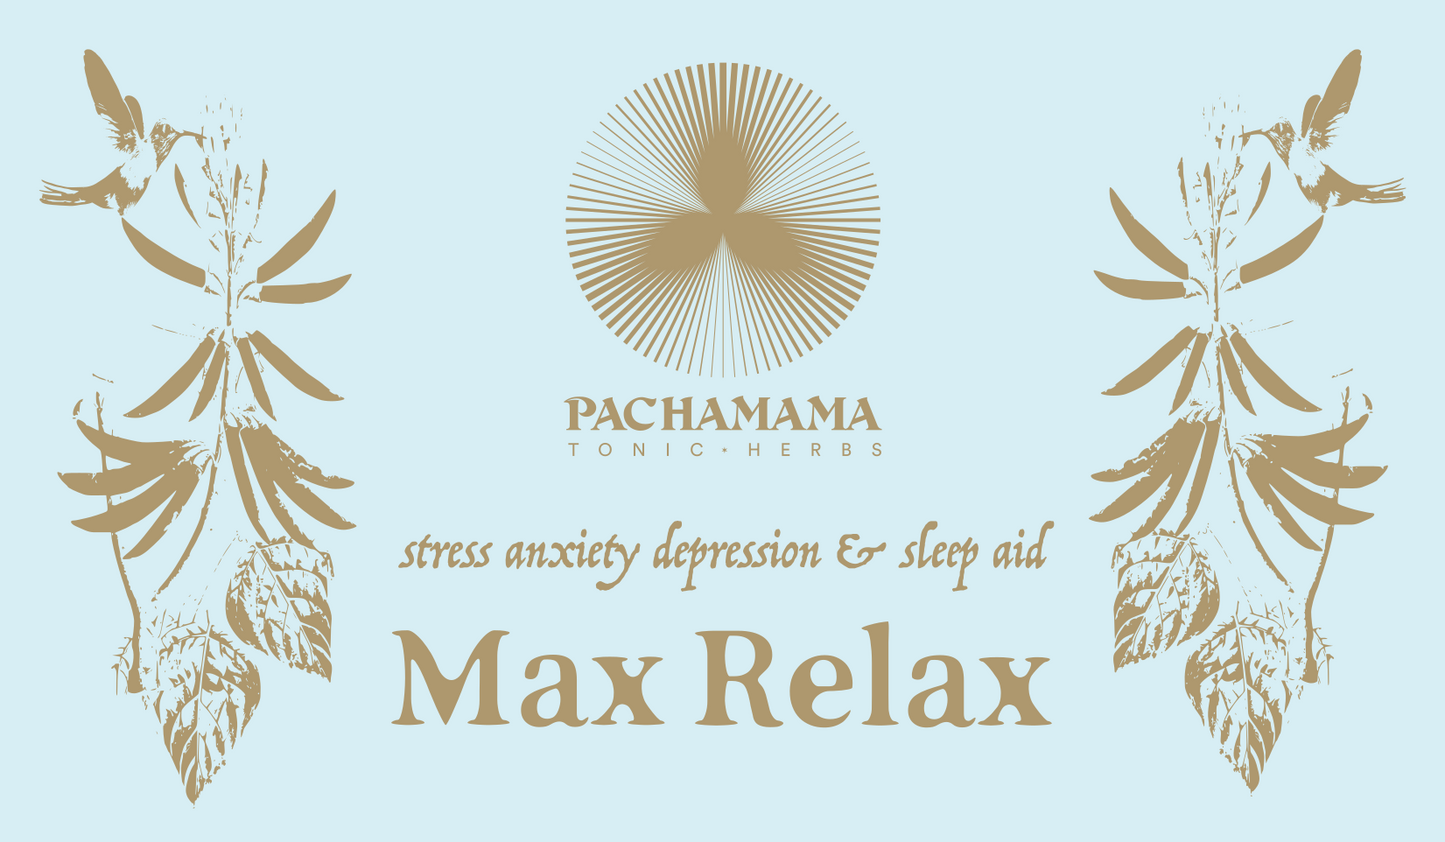 MAX RELAX